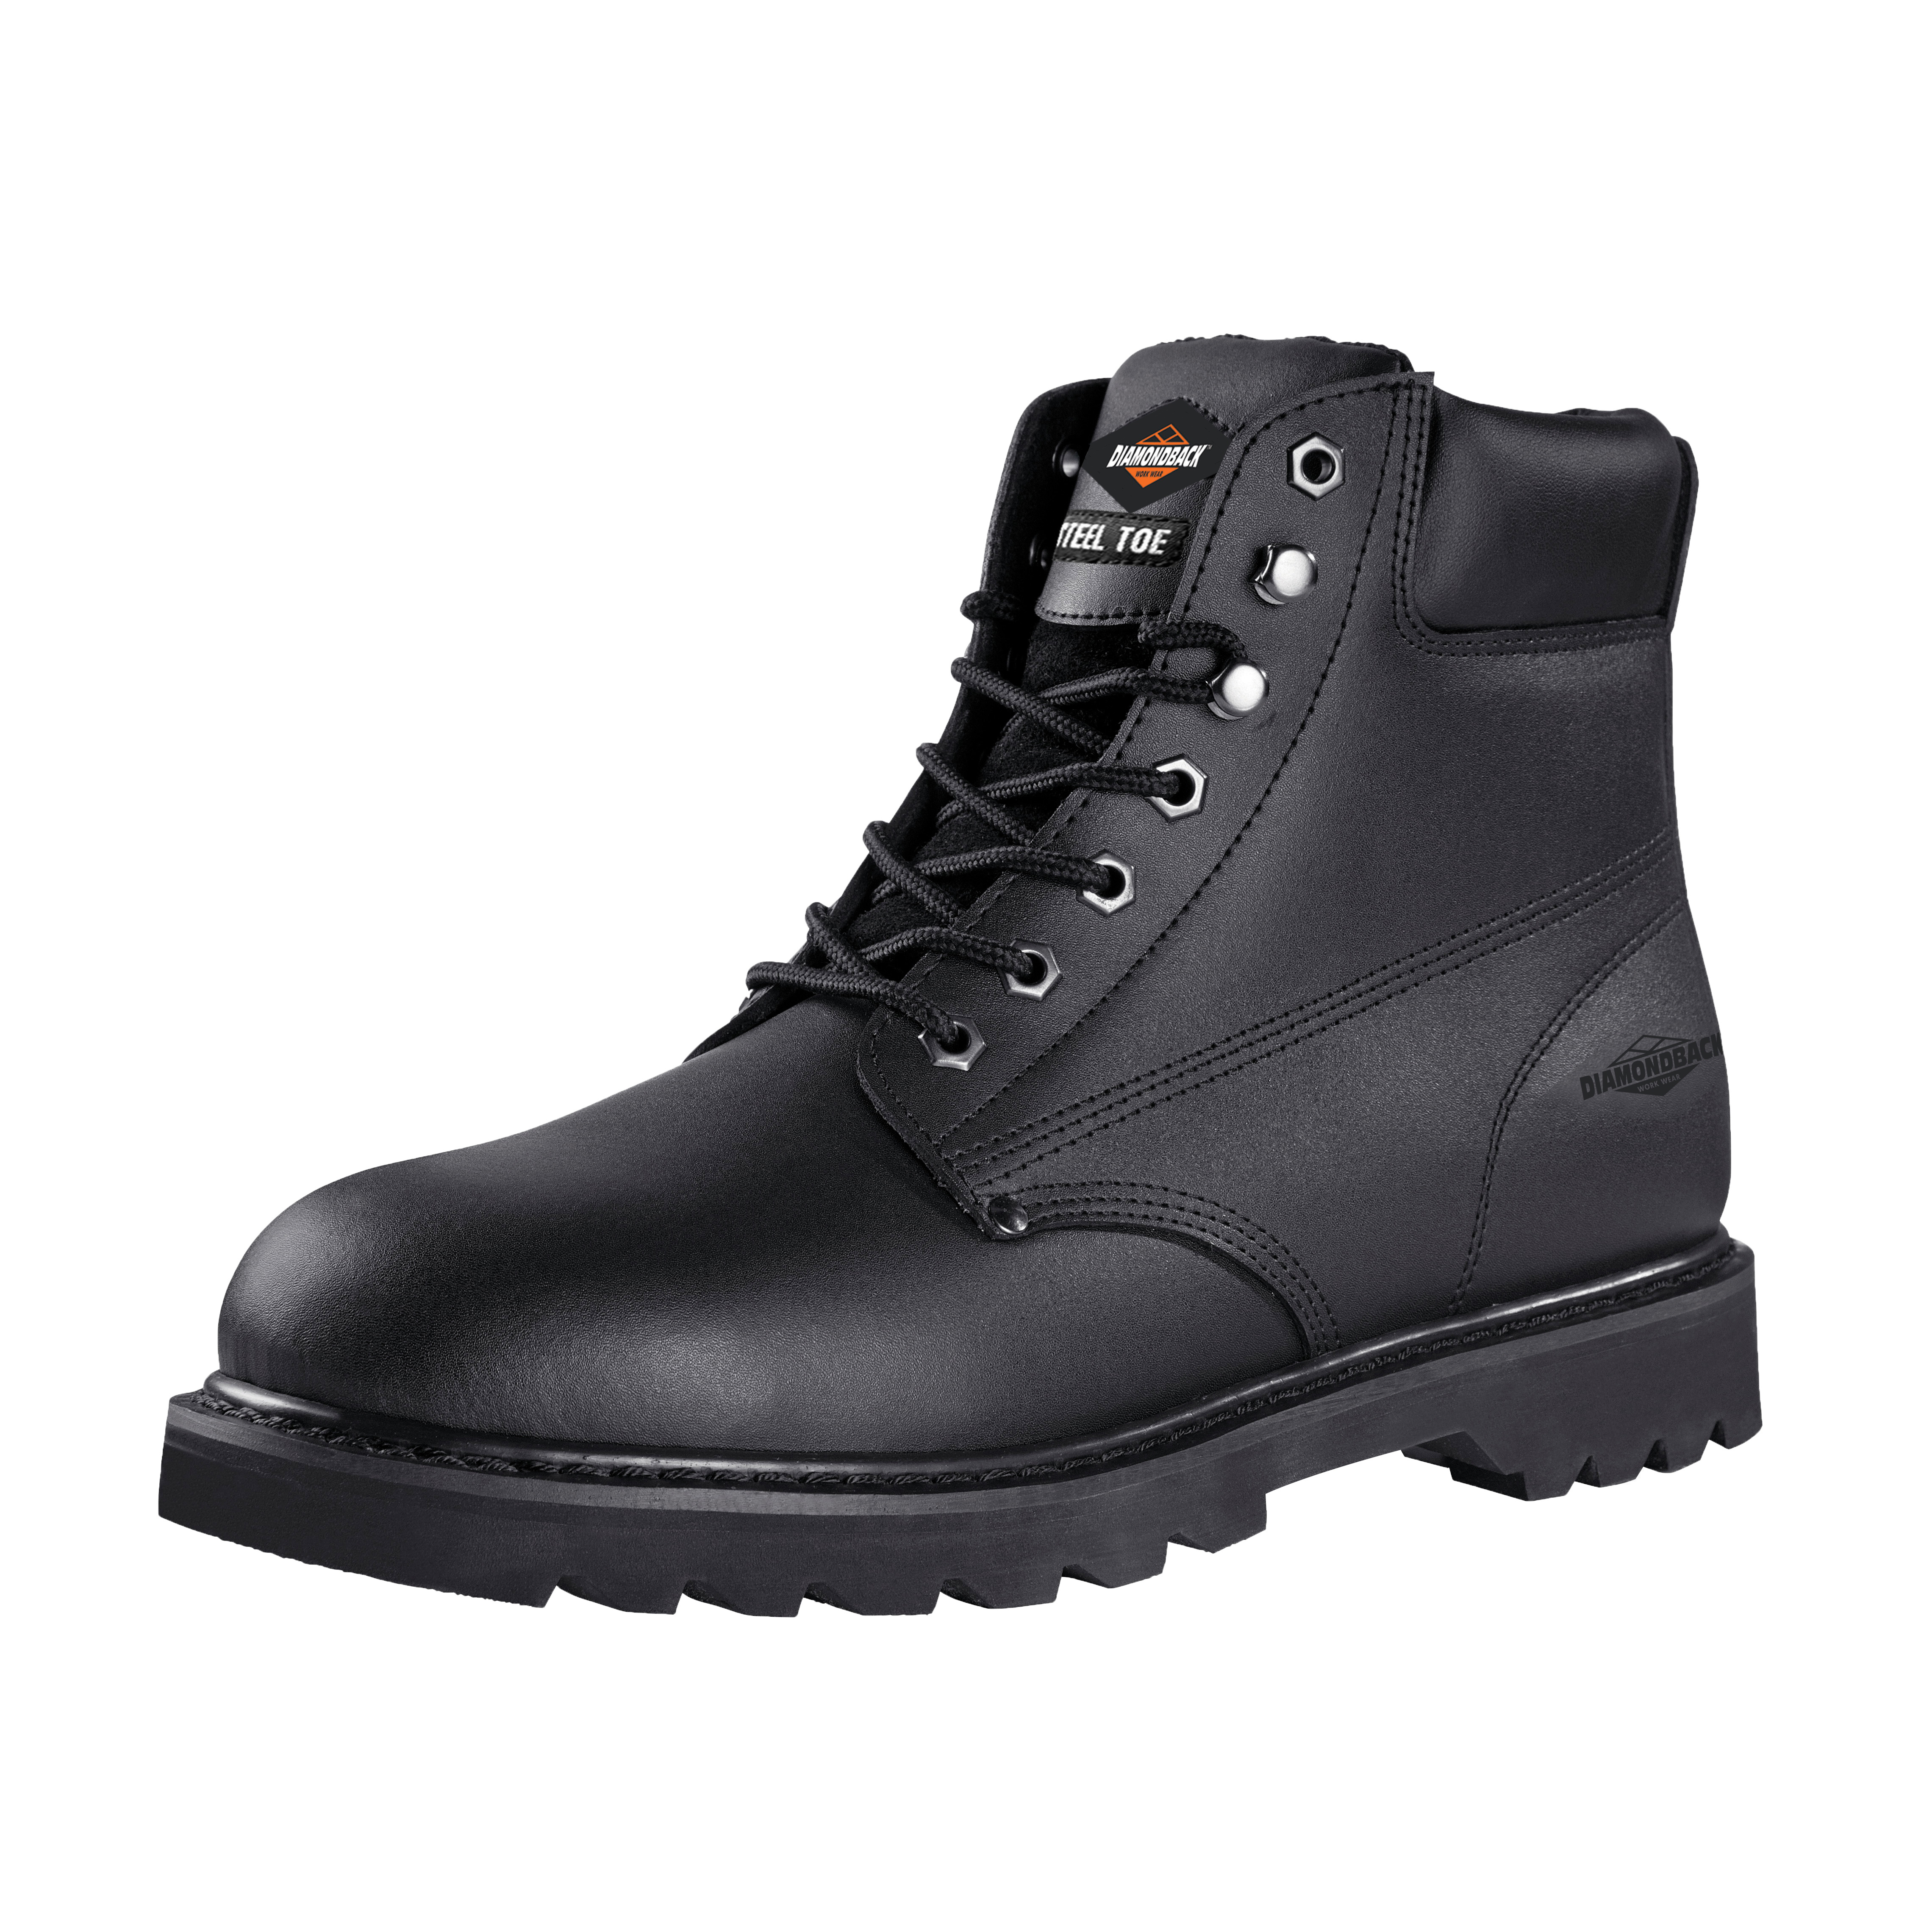 655SS-8 Work Boots, 8, Medium Shoe Last W, Black, Leather Upper, Lace-Up Boots Closure, With Lining